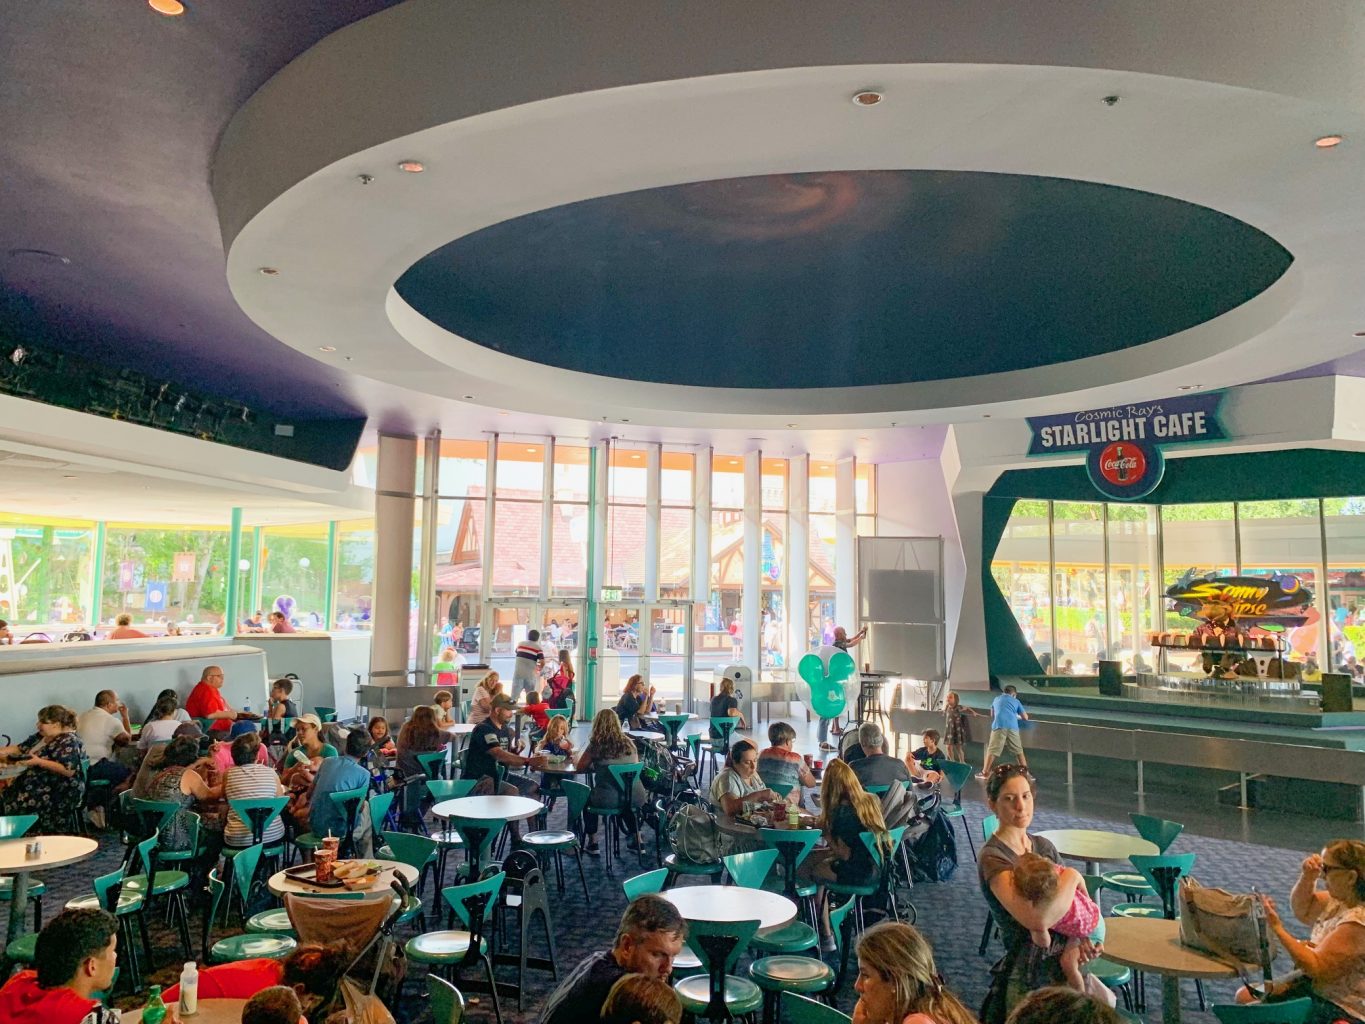 A room filled with people in green chairs and large spaceship-like circle on the ceiling is a common sight at Cosmic Rays, one of the best Magic Kingdom restaurants.